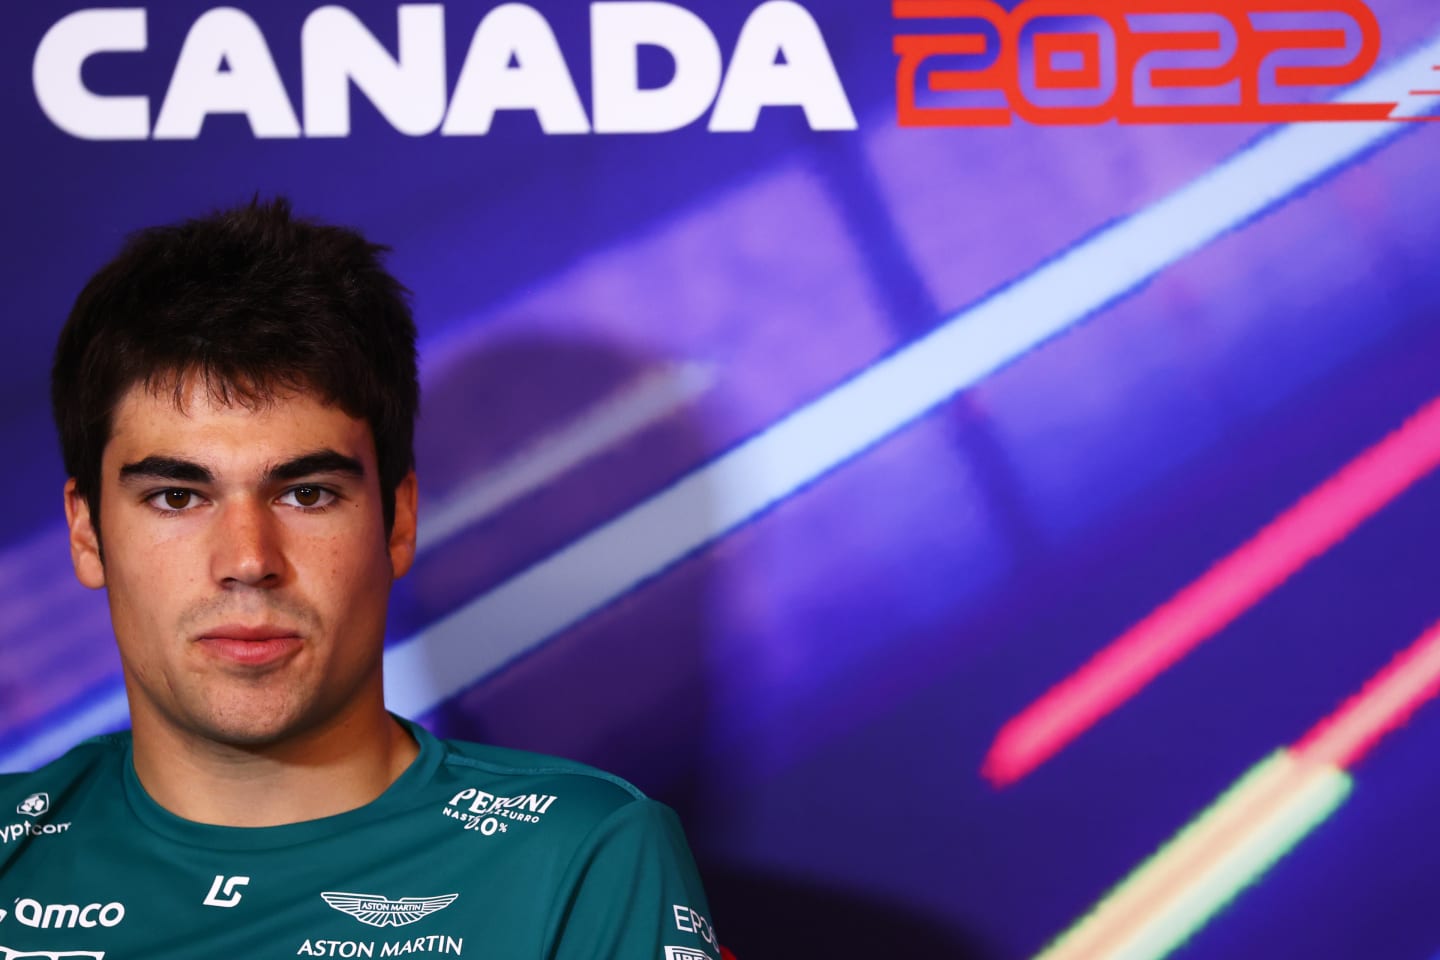 MONTREAL, QUEBEC - JUNE 17: Lance Stroll of Canada and Aston Martin F1 Team looks on in the Drivers Press Conference prior to practice ahead of the F1 Grand Prix of Canada at Circuit Gilles Villeneuve on June 17, 2022 in Montreal, Quebec. (Photo by Dan Istitene/Getty Images)